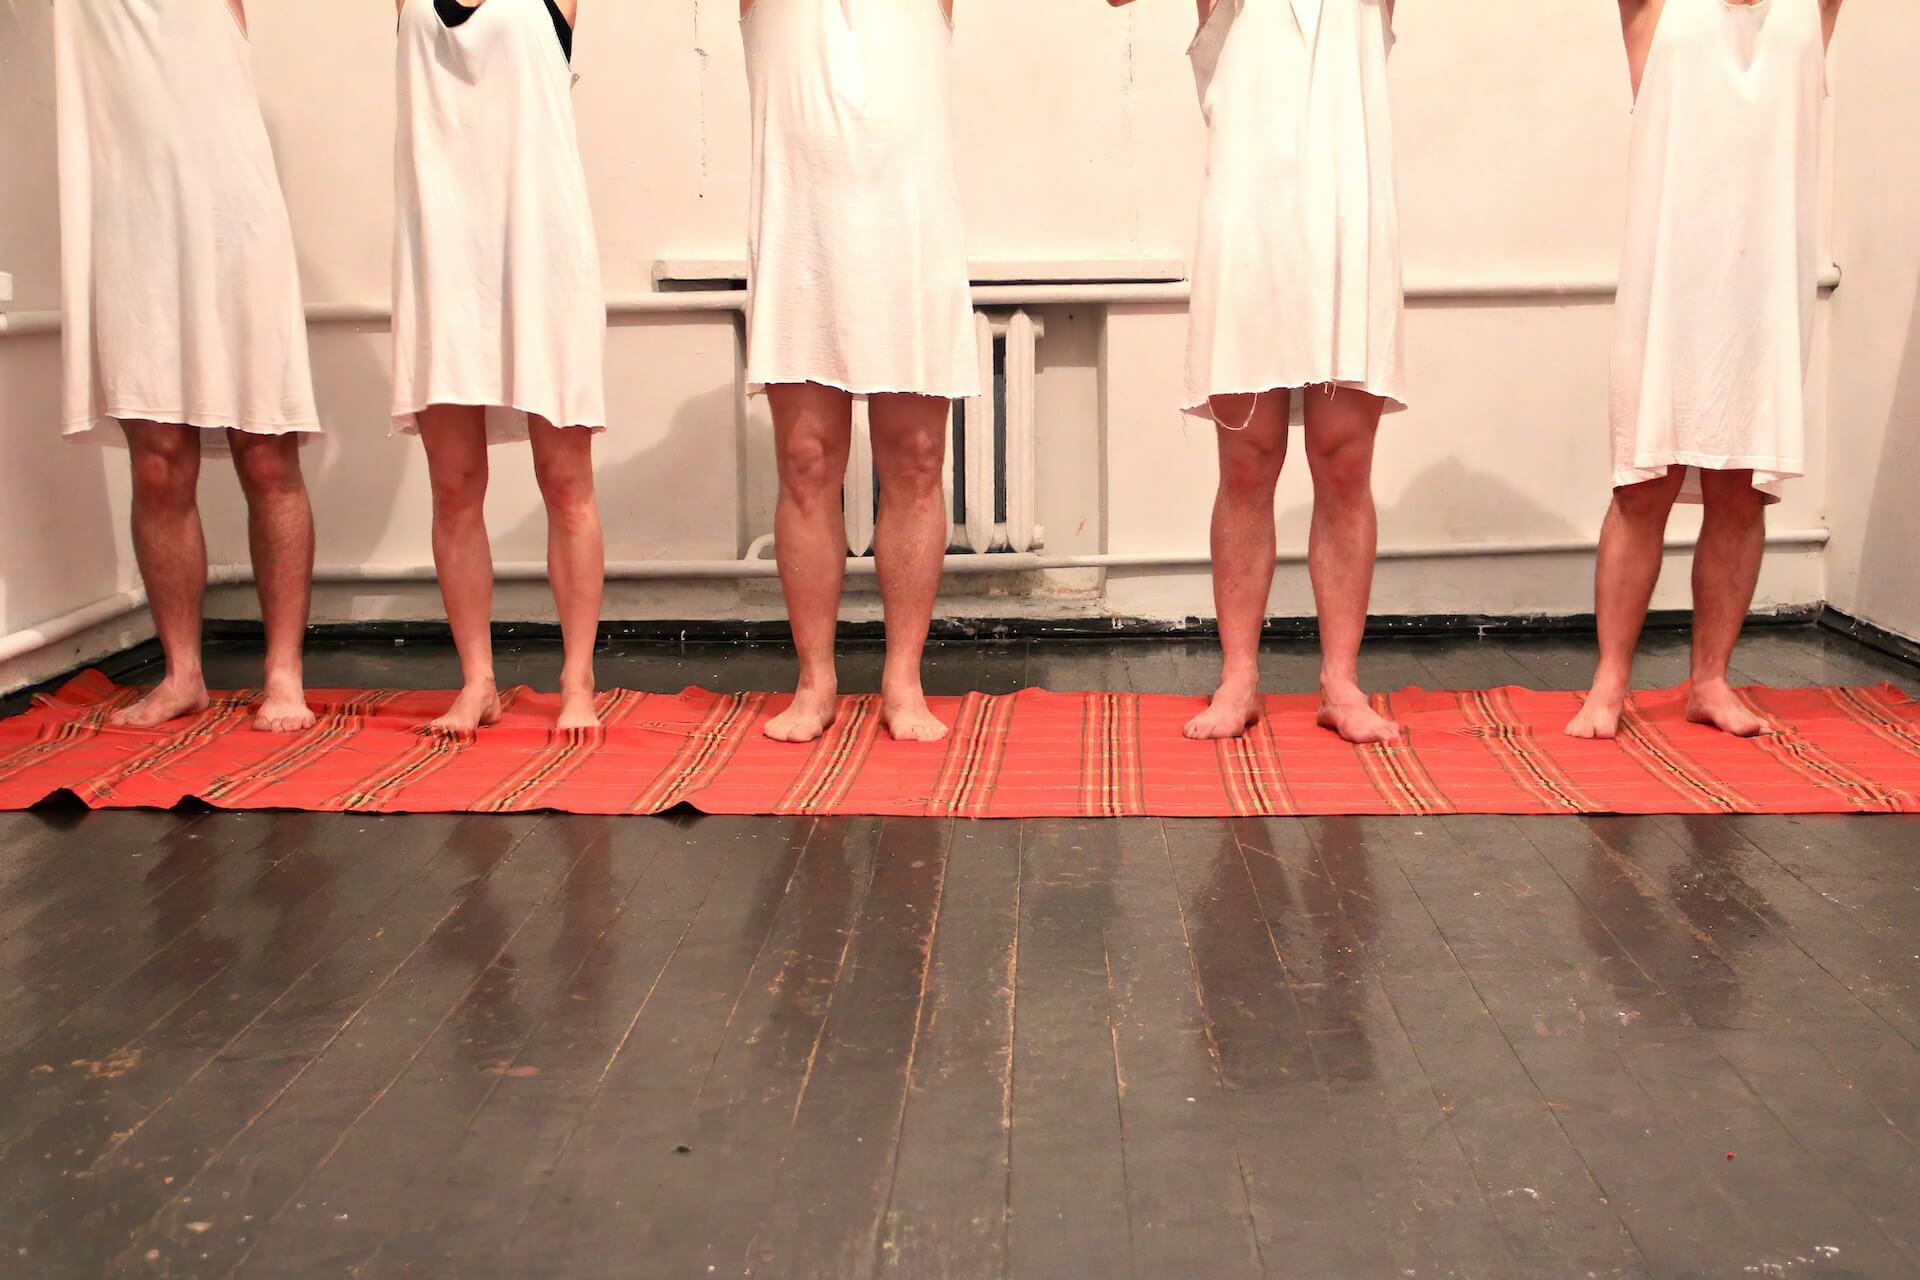 Close up to the feet of the five performers standing in line on a red blanket